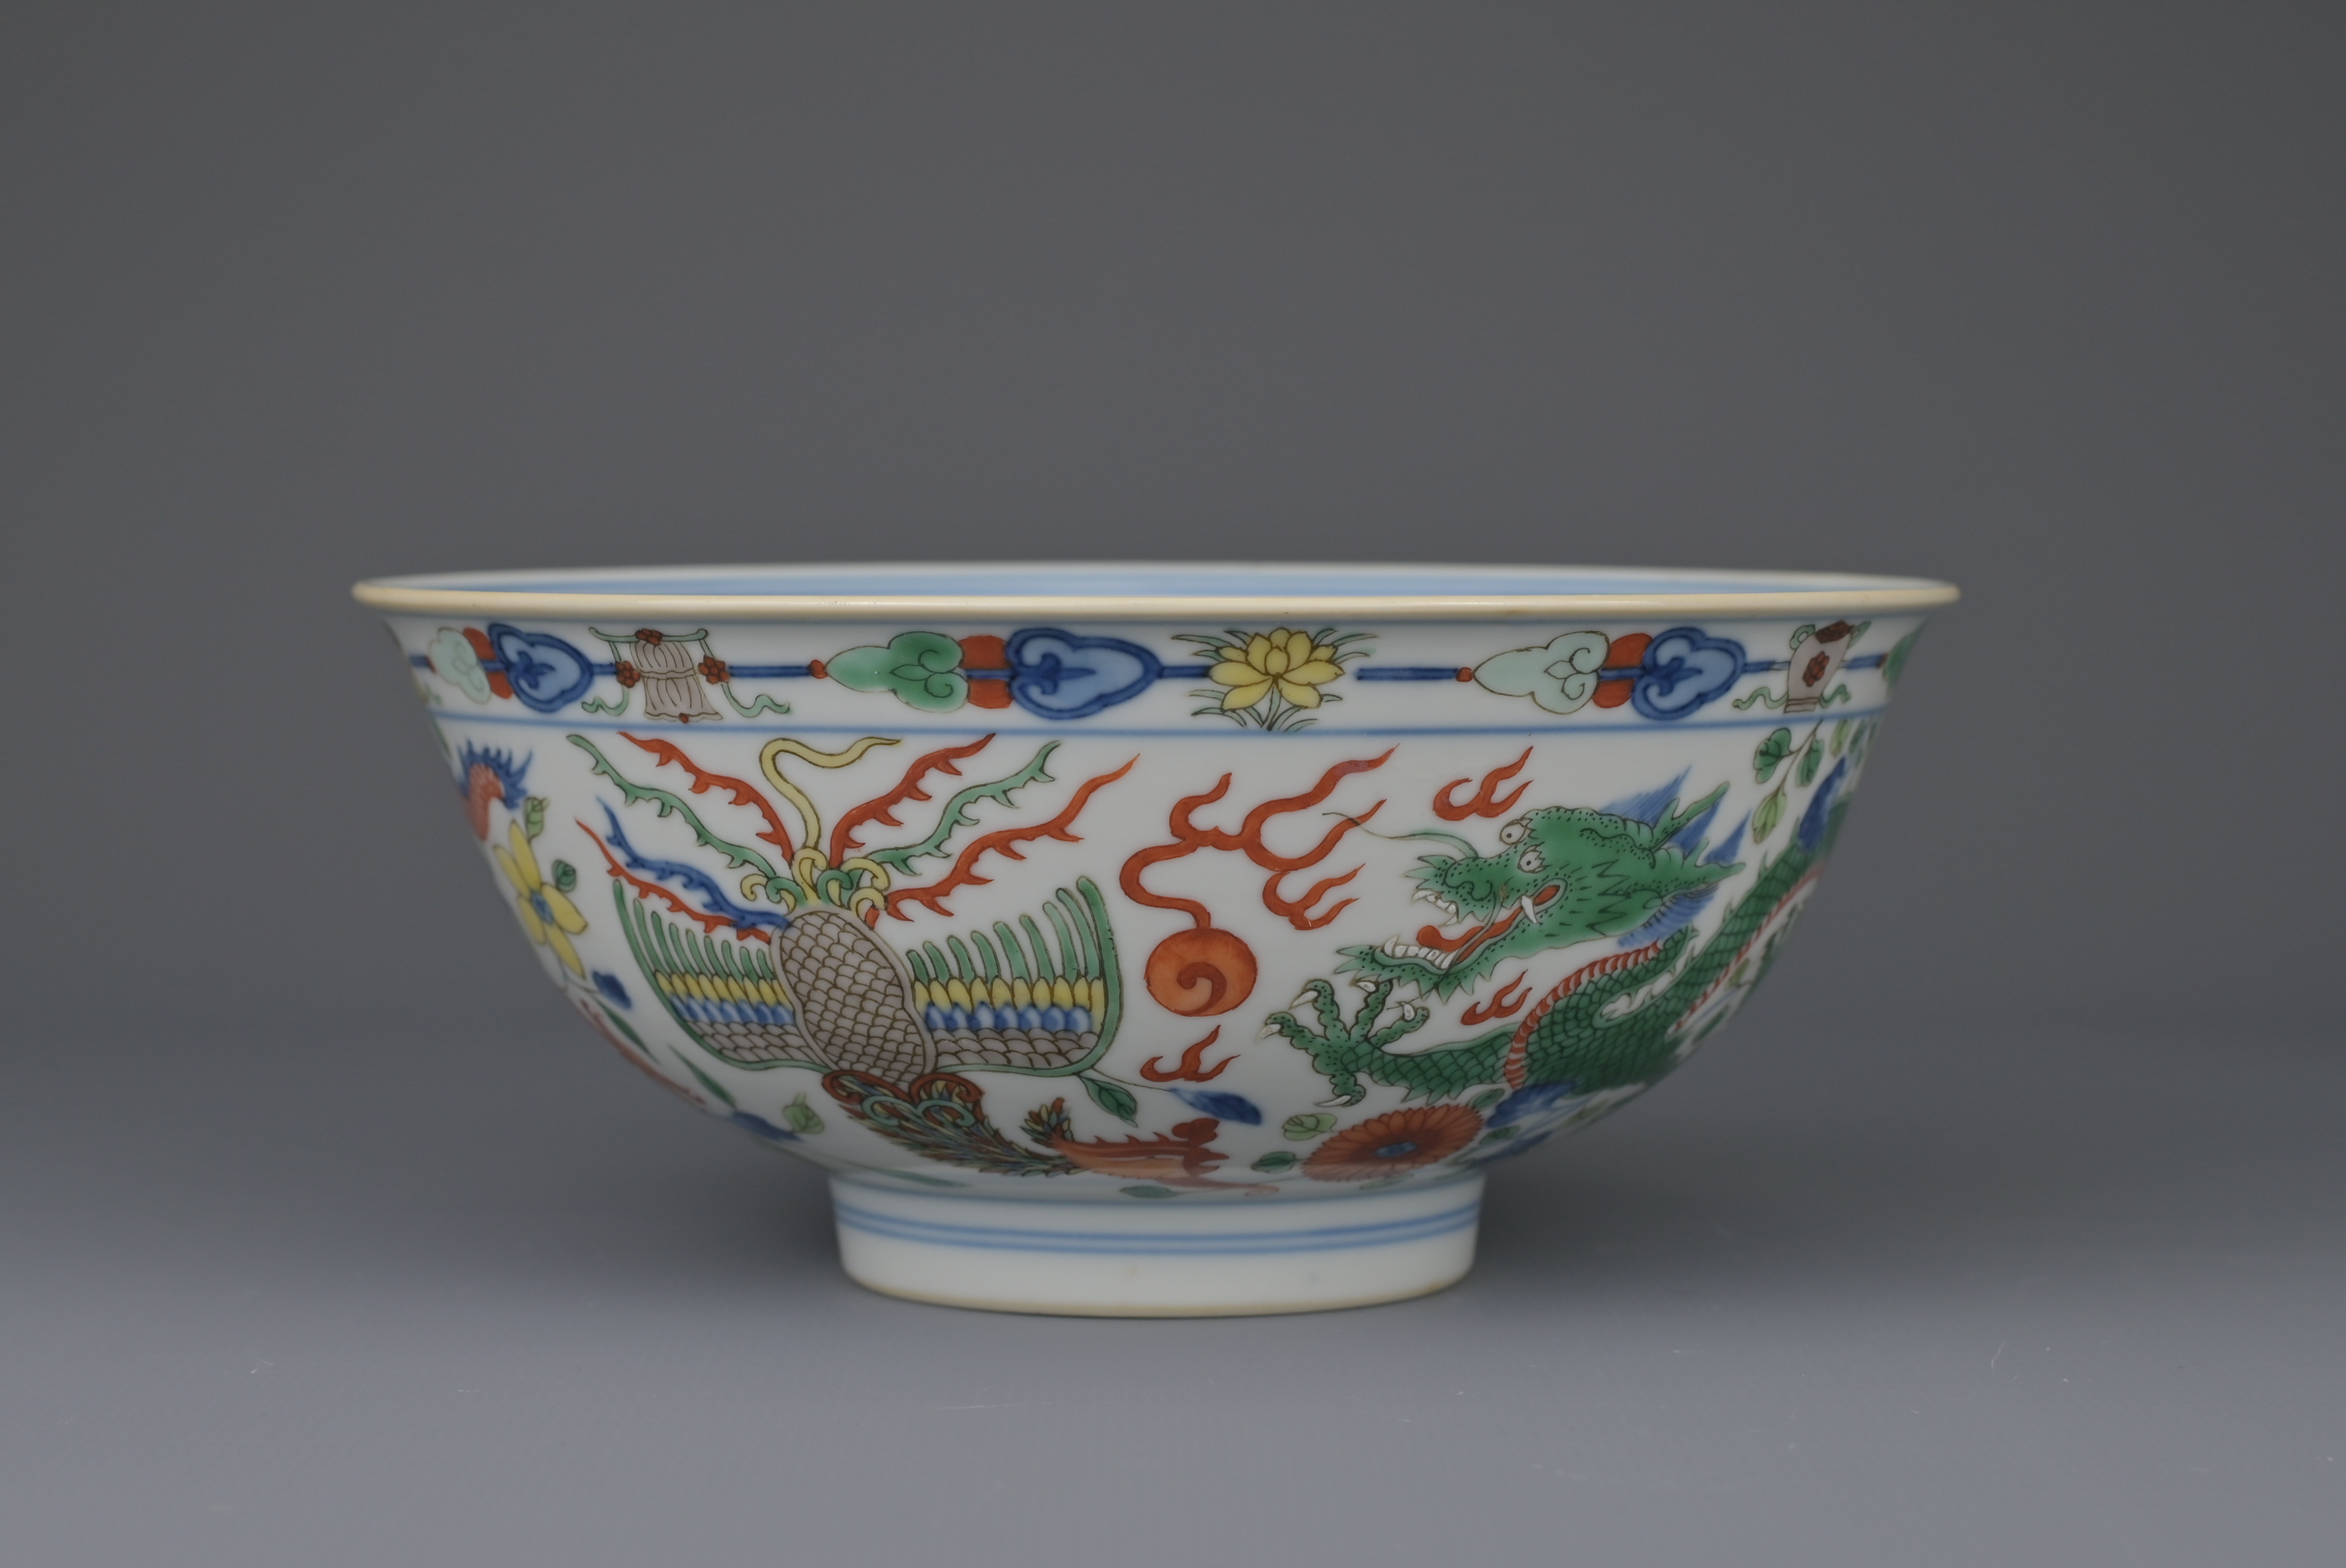 FINE CHINESE WUCAI ‘DRAGON & PHOENIX’ PORCELAIN BOWL, JIAQING MARK AND PERIOD, EARLY 19th CENTURY - Image 4 of 14